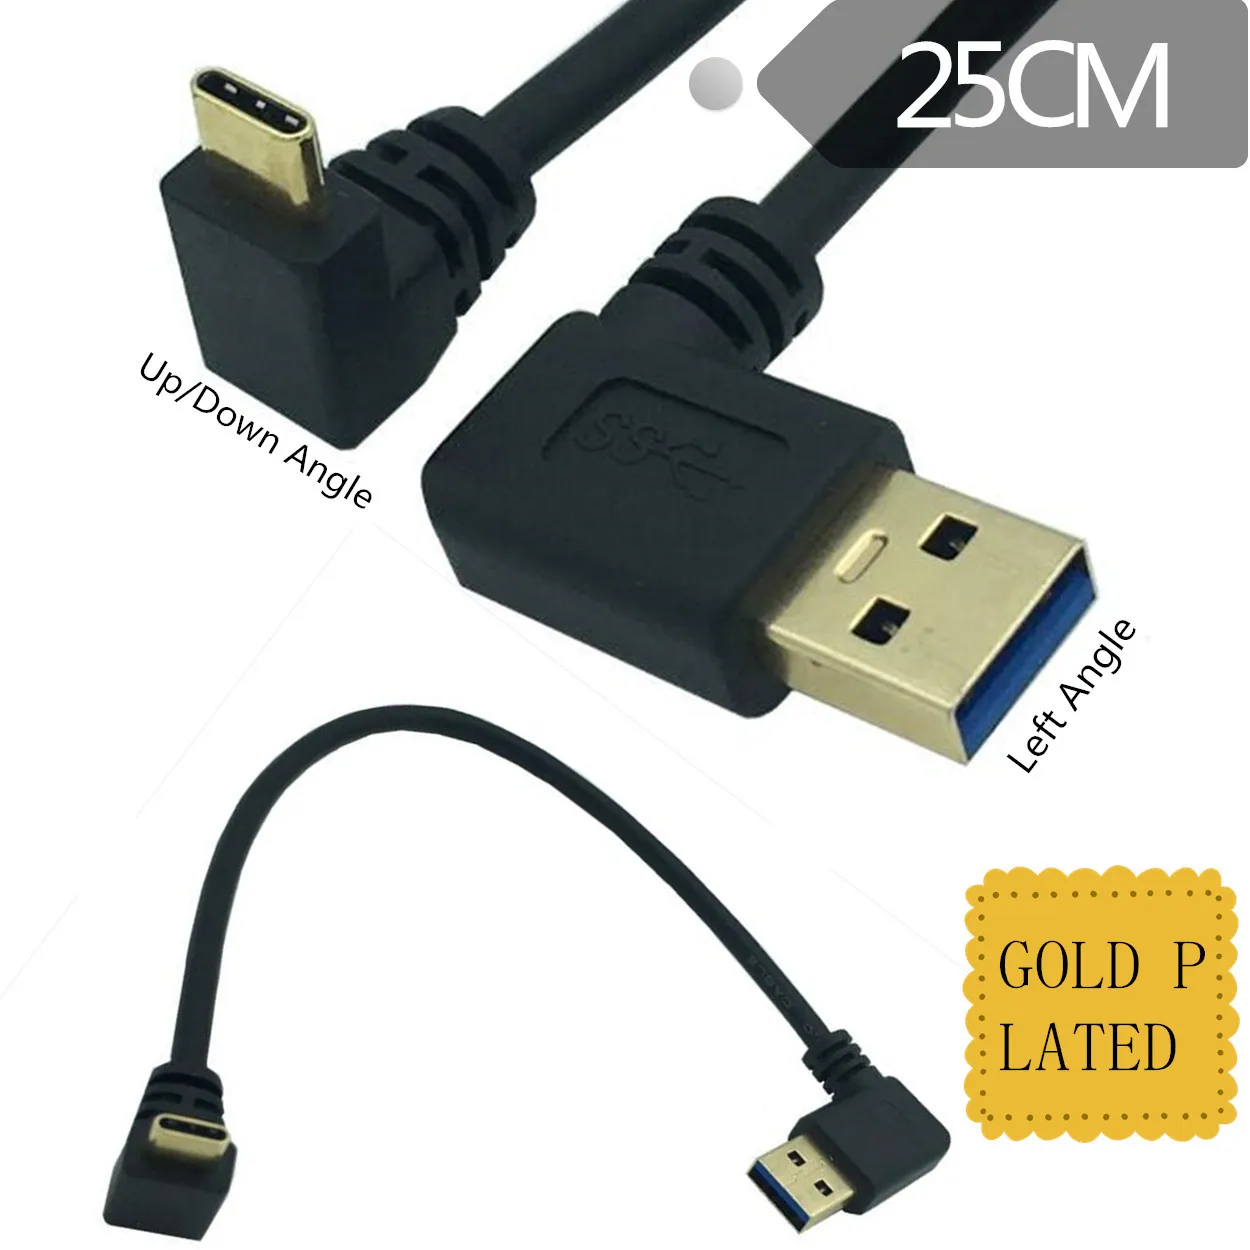 Купи Left/Right Angle USB 3.0 A Male To USB-C Male Cable 90 Degree UP/Down USB 3.0 A To USB Type C Data Sync & Charge Cord For PC HDD за 182 рублей в магазине AliExpress